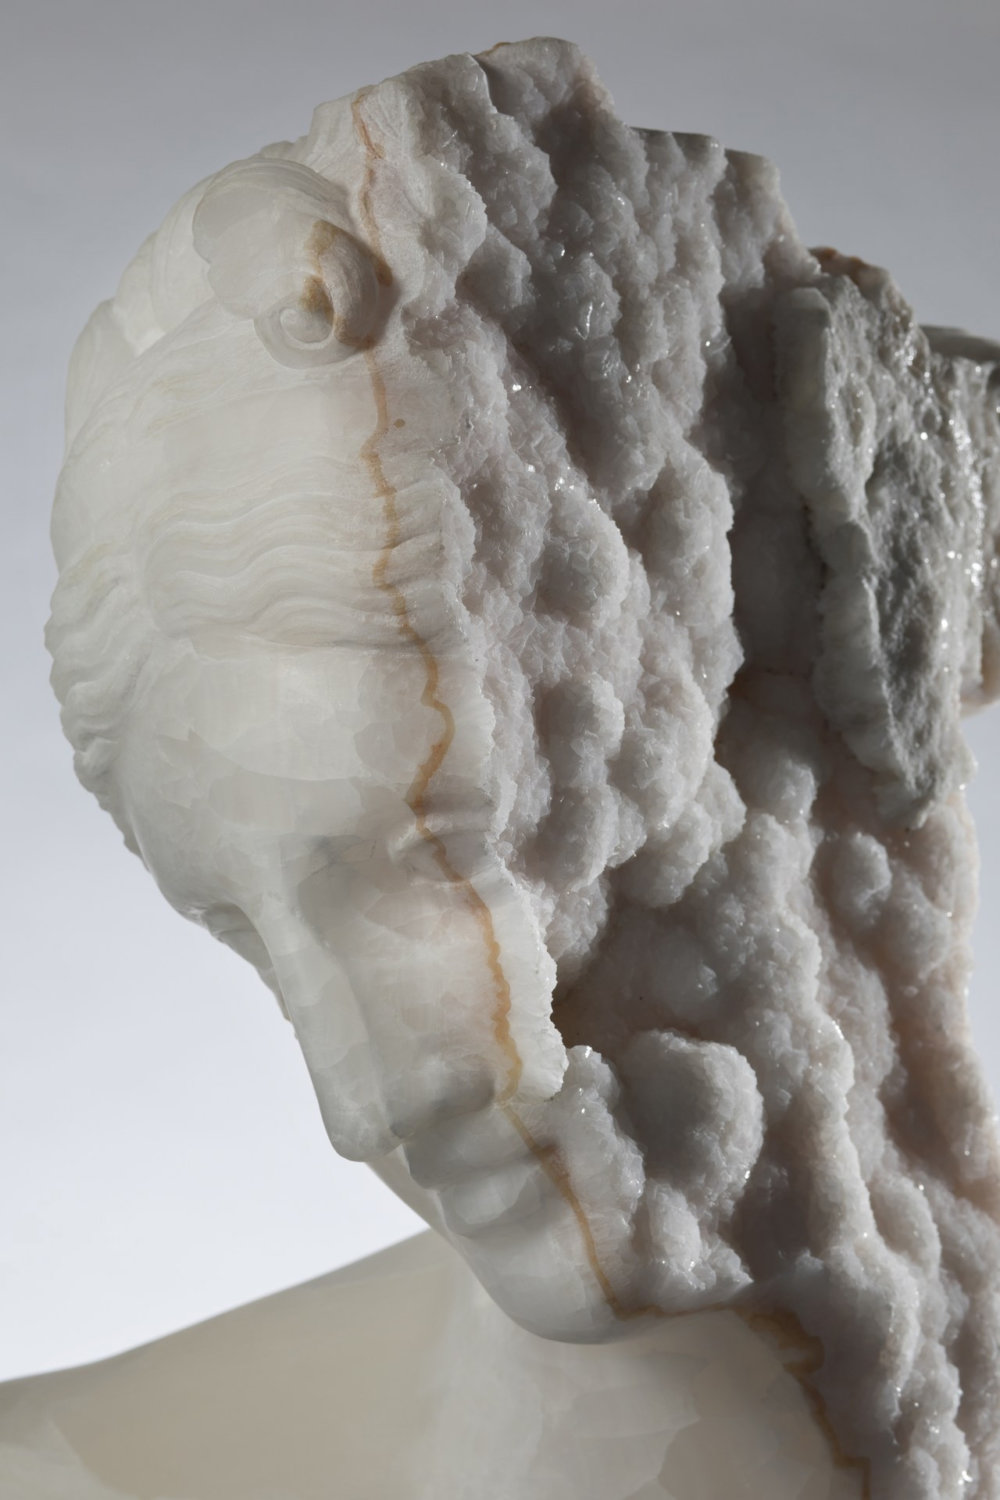 The Beauty Of Imperfection Fragmented Classical Sculptures By Massimiliano Pelletti 3